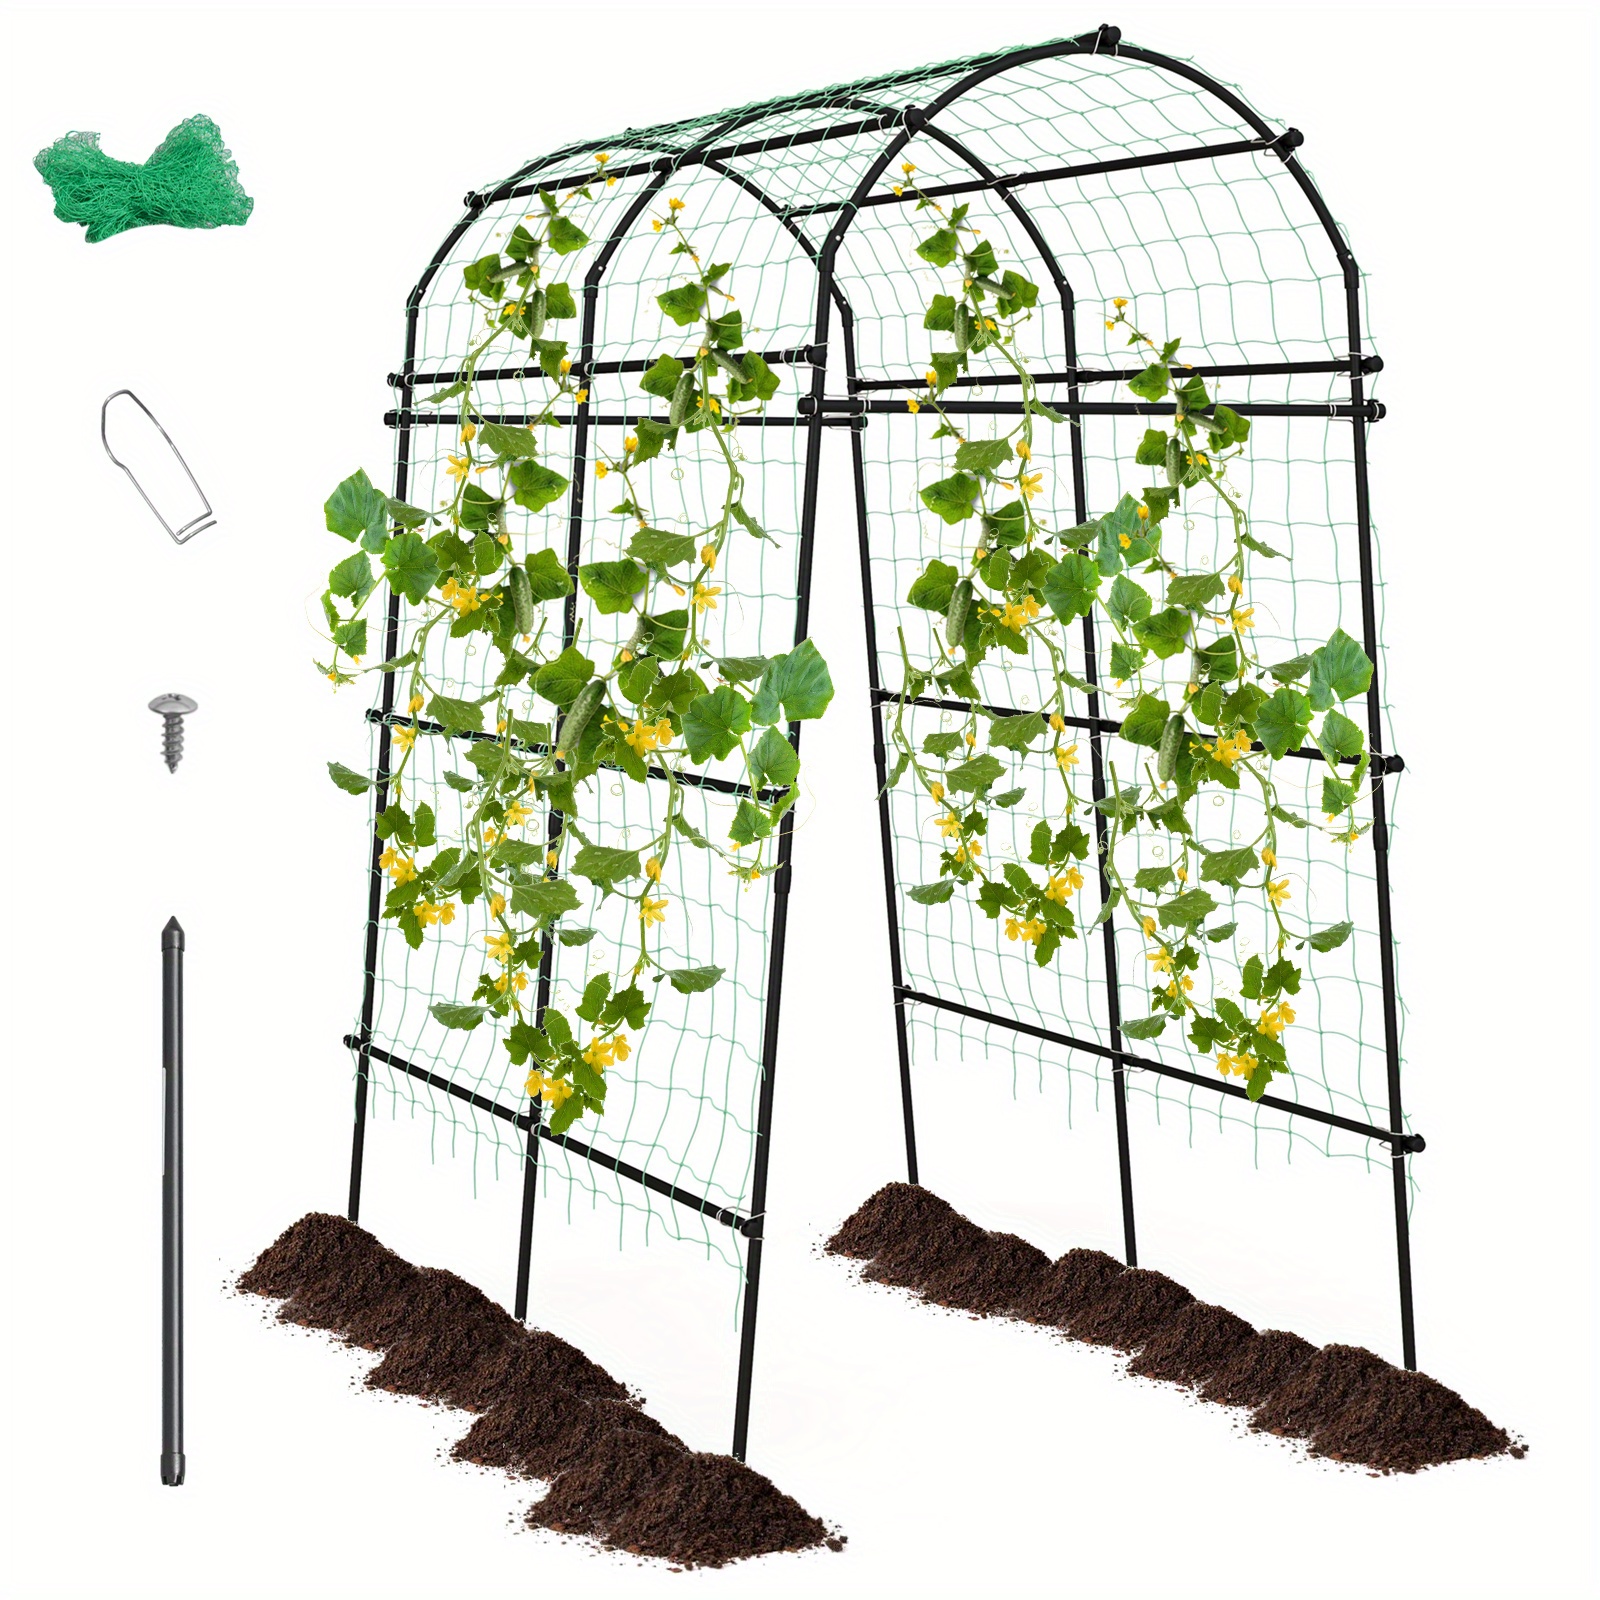 

Lifezeal 7.5ft Garden Arch Trellis Outdoor Plant Support Archway For Climbing Vine Flower